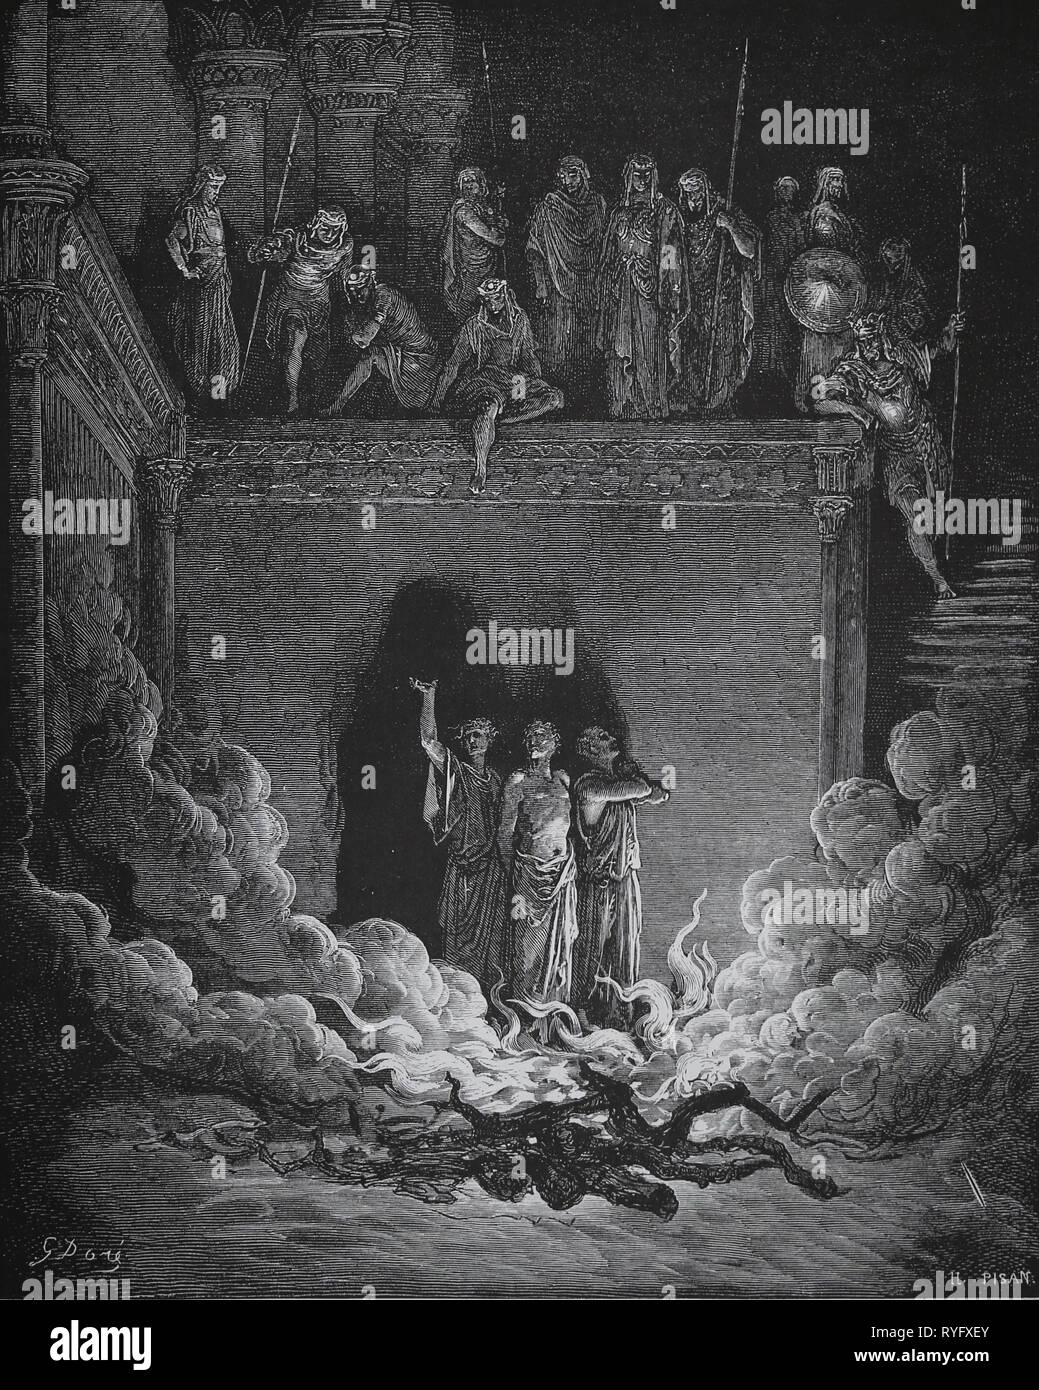 The Bible. The Prophets. Shadrach, Meshach and Abednego in the Furnace. Engraving by  Gustave Dore, 1866. Stock Photo